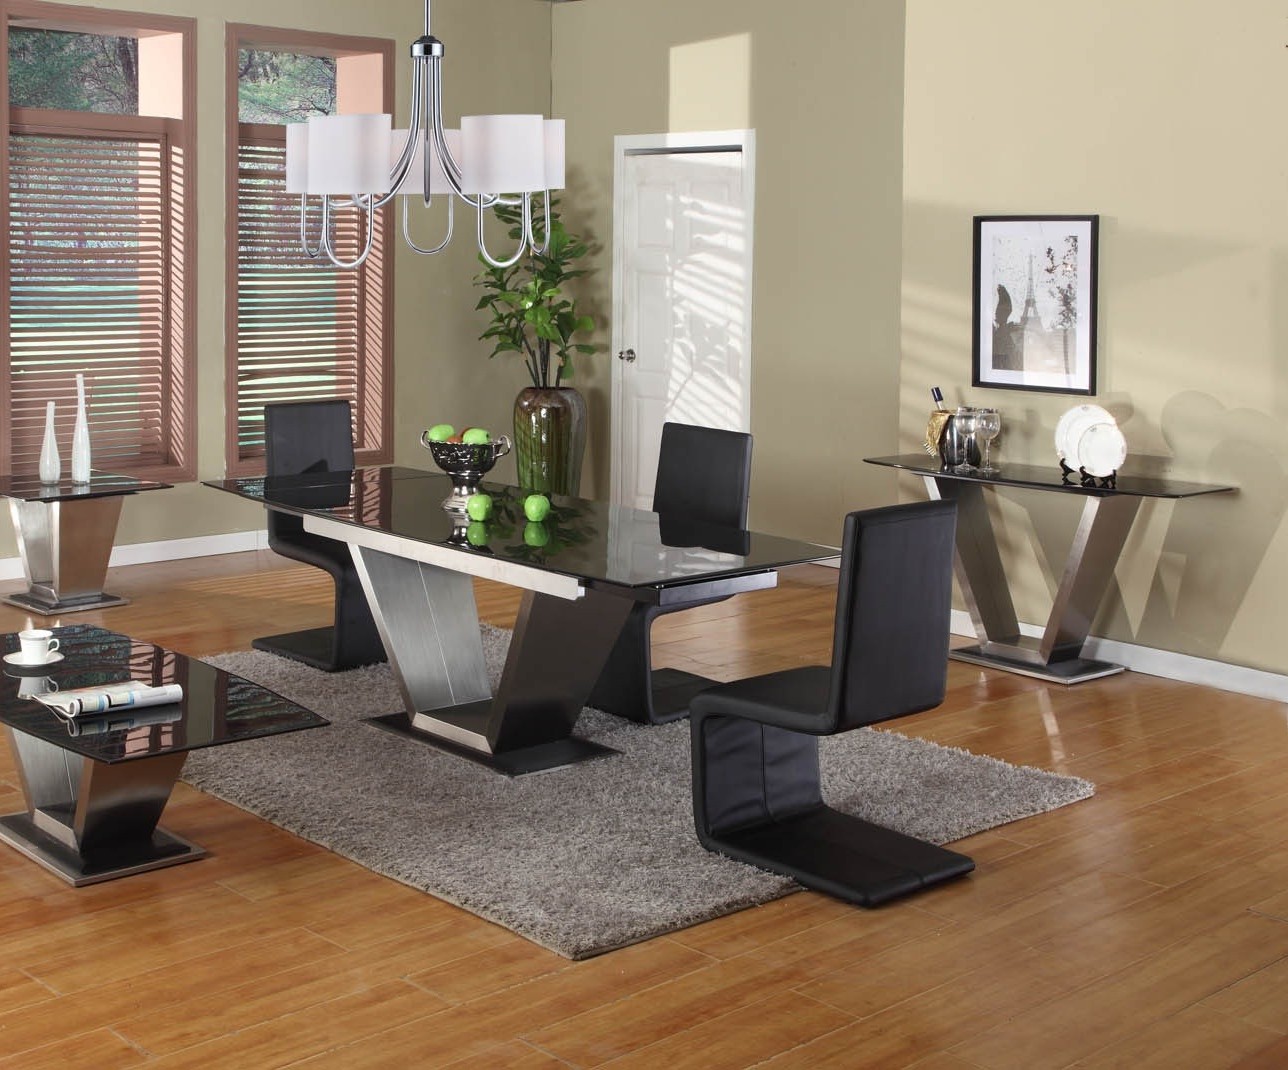 Leather Chairs Chandelier Unique Leather Chairs Also Round Chandelier Feat Awesome Granite Dining Table Design Plus Gray Shag Rug Dining Room  Granite Dining Table Brings Cool Styles 